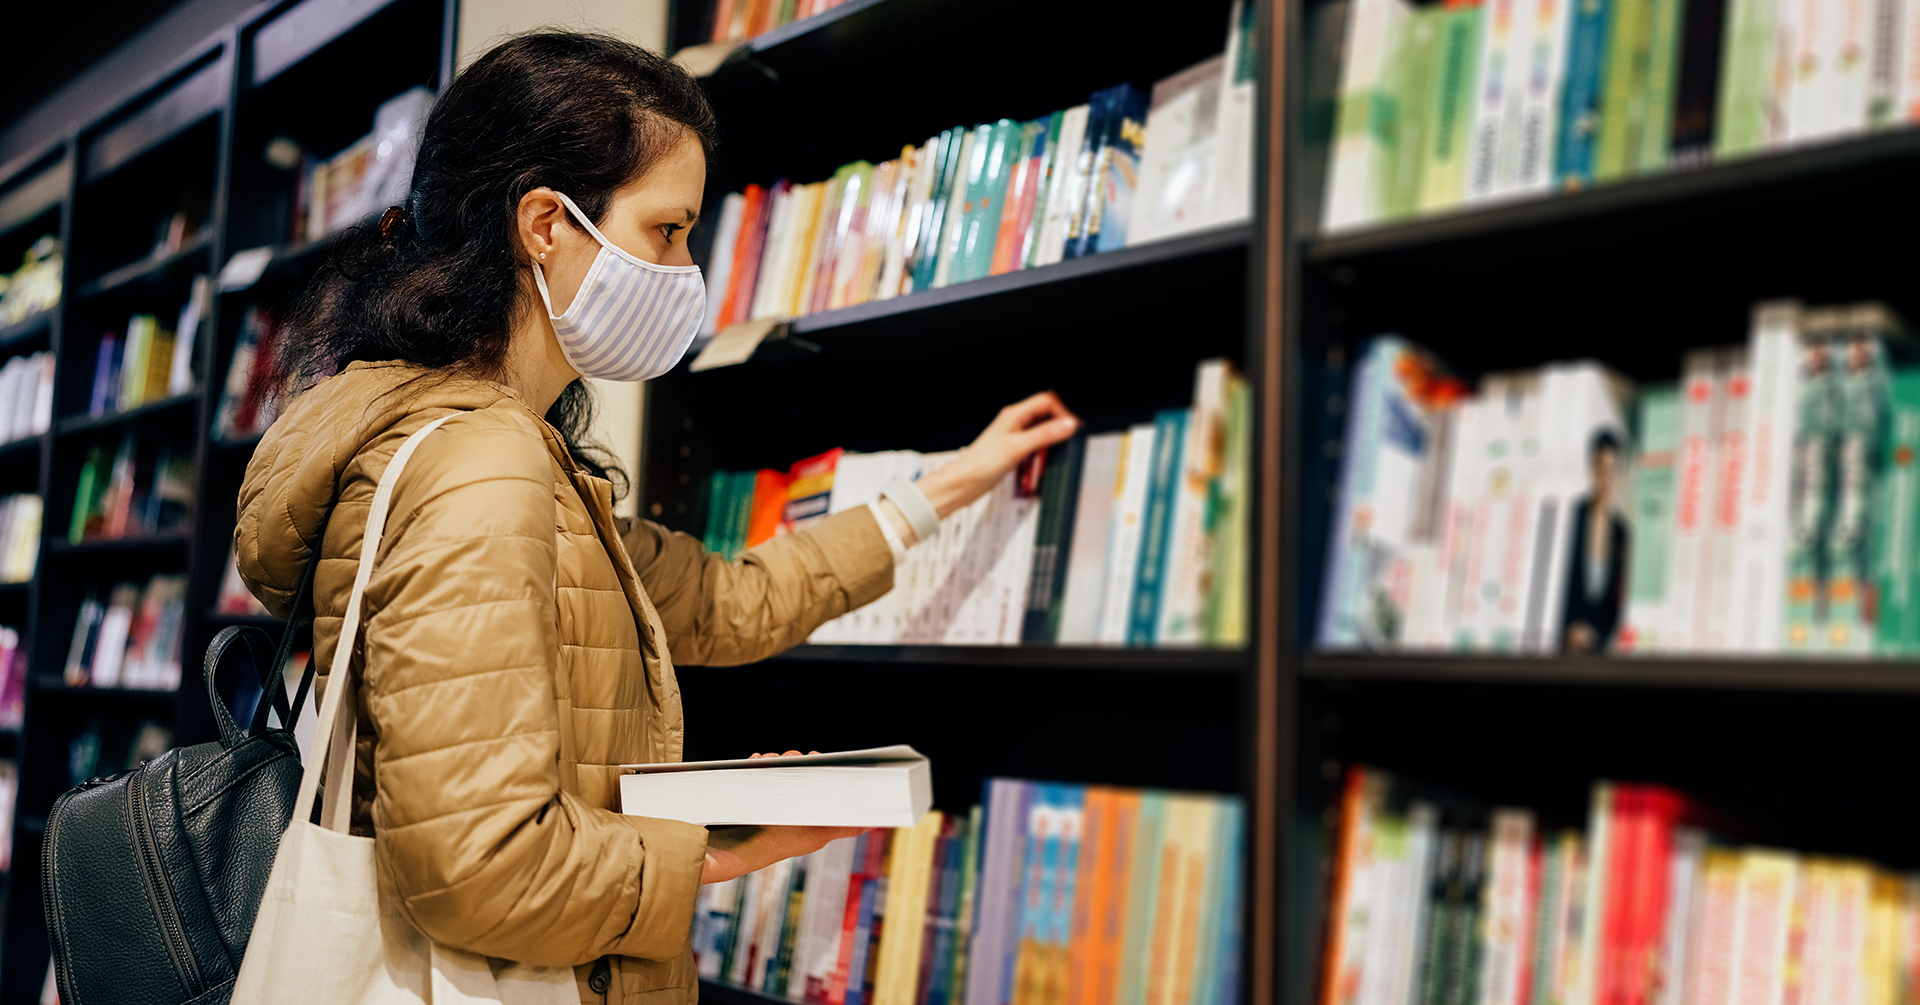 Woman with protective face mask reading a book in the bookstore